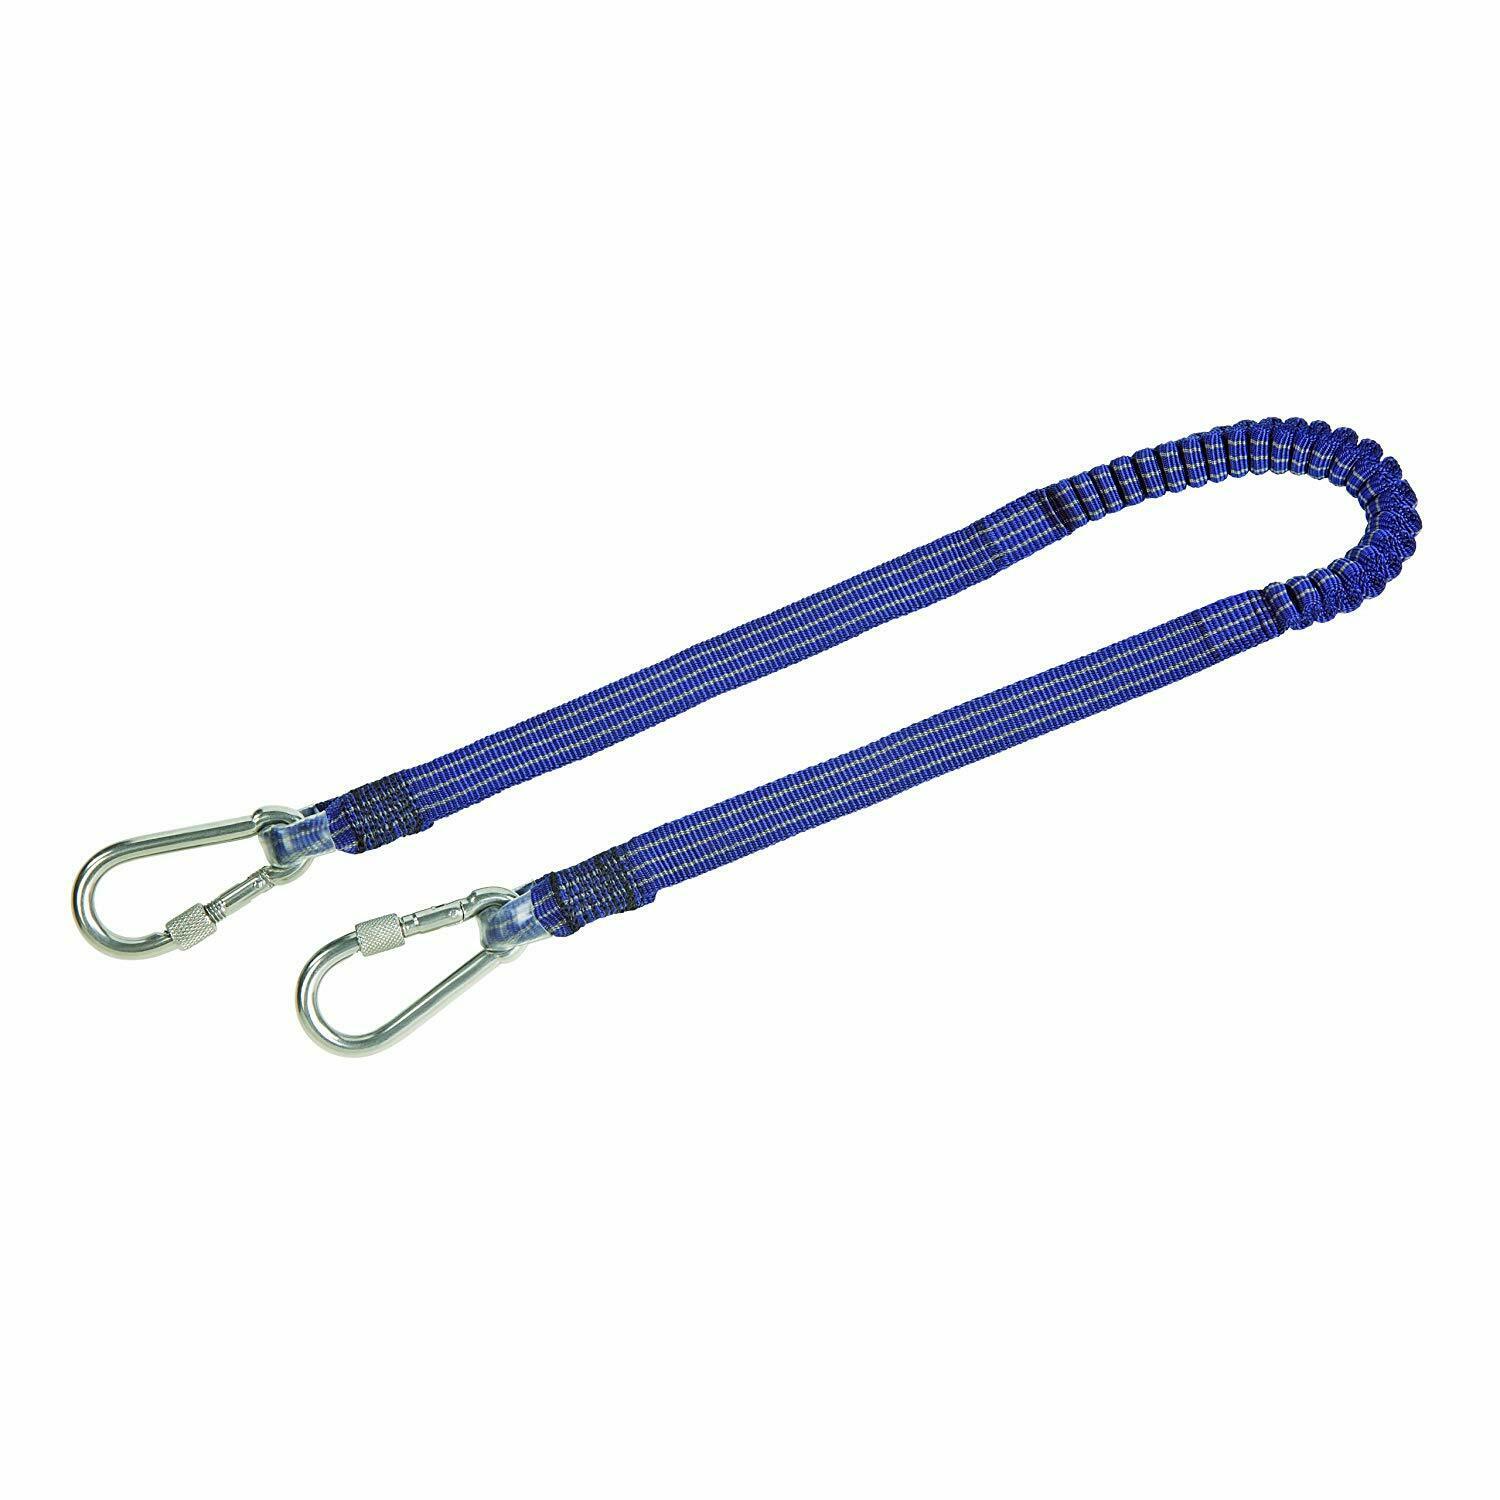 High Quality Tool Lanyard Retractable - Tool lanyard,  w/Carabiner Hooks At Both Ends – Bison